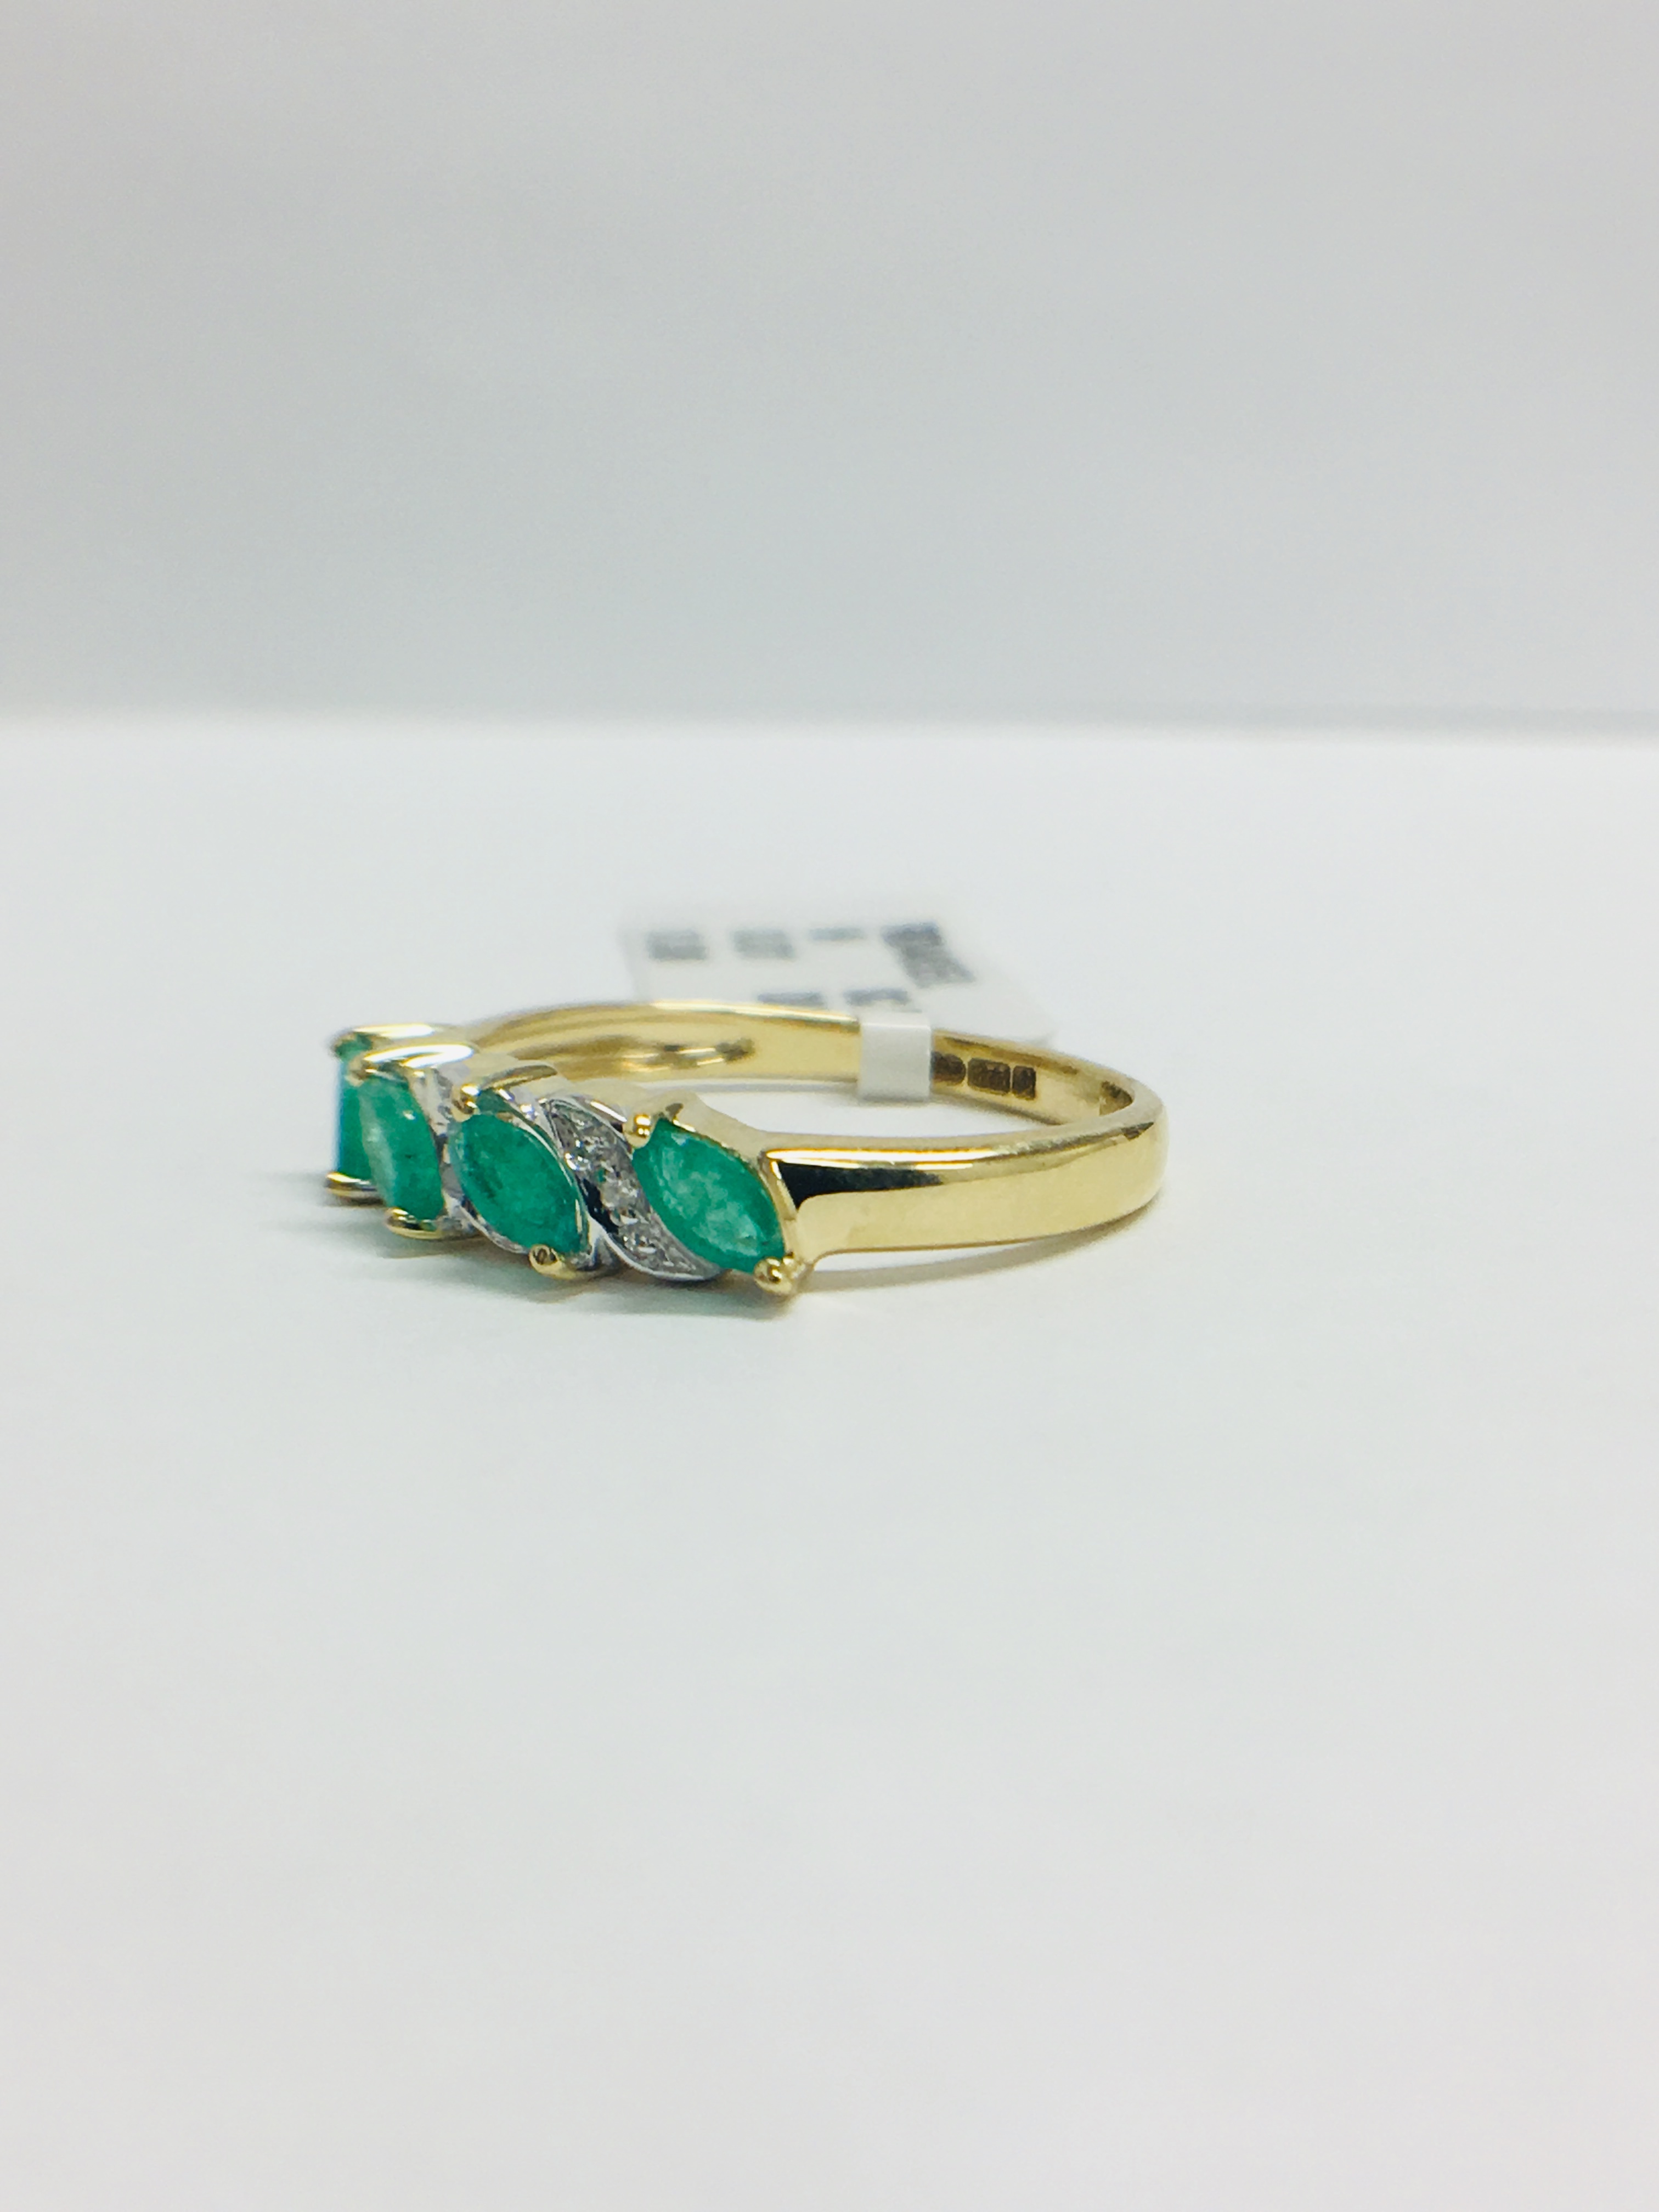 9ct yellow gold emerald and diamond ring - Image 4 of 11